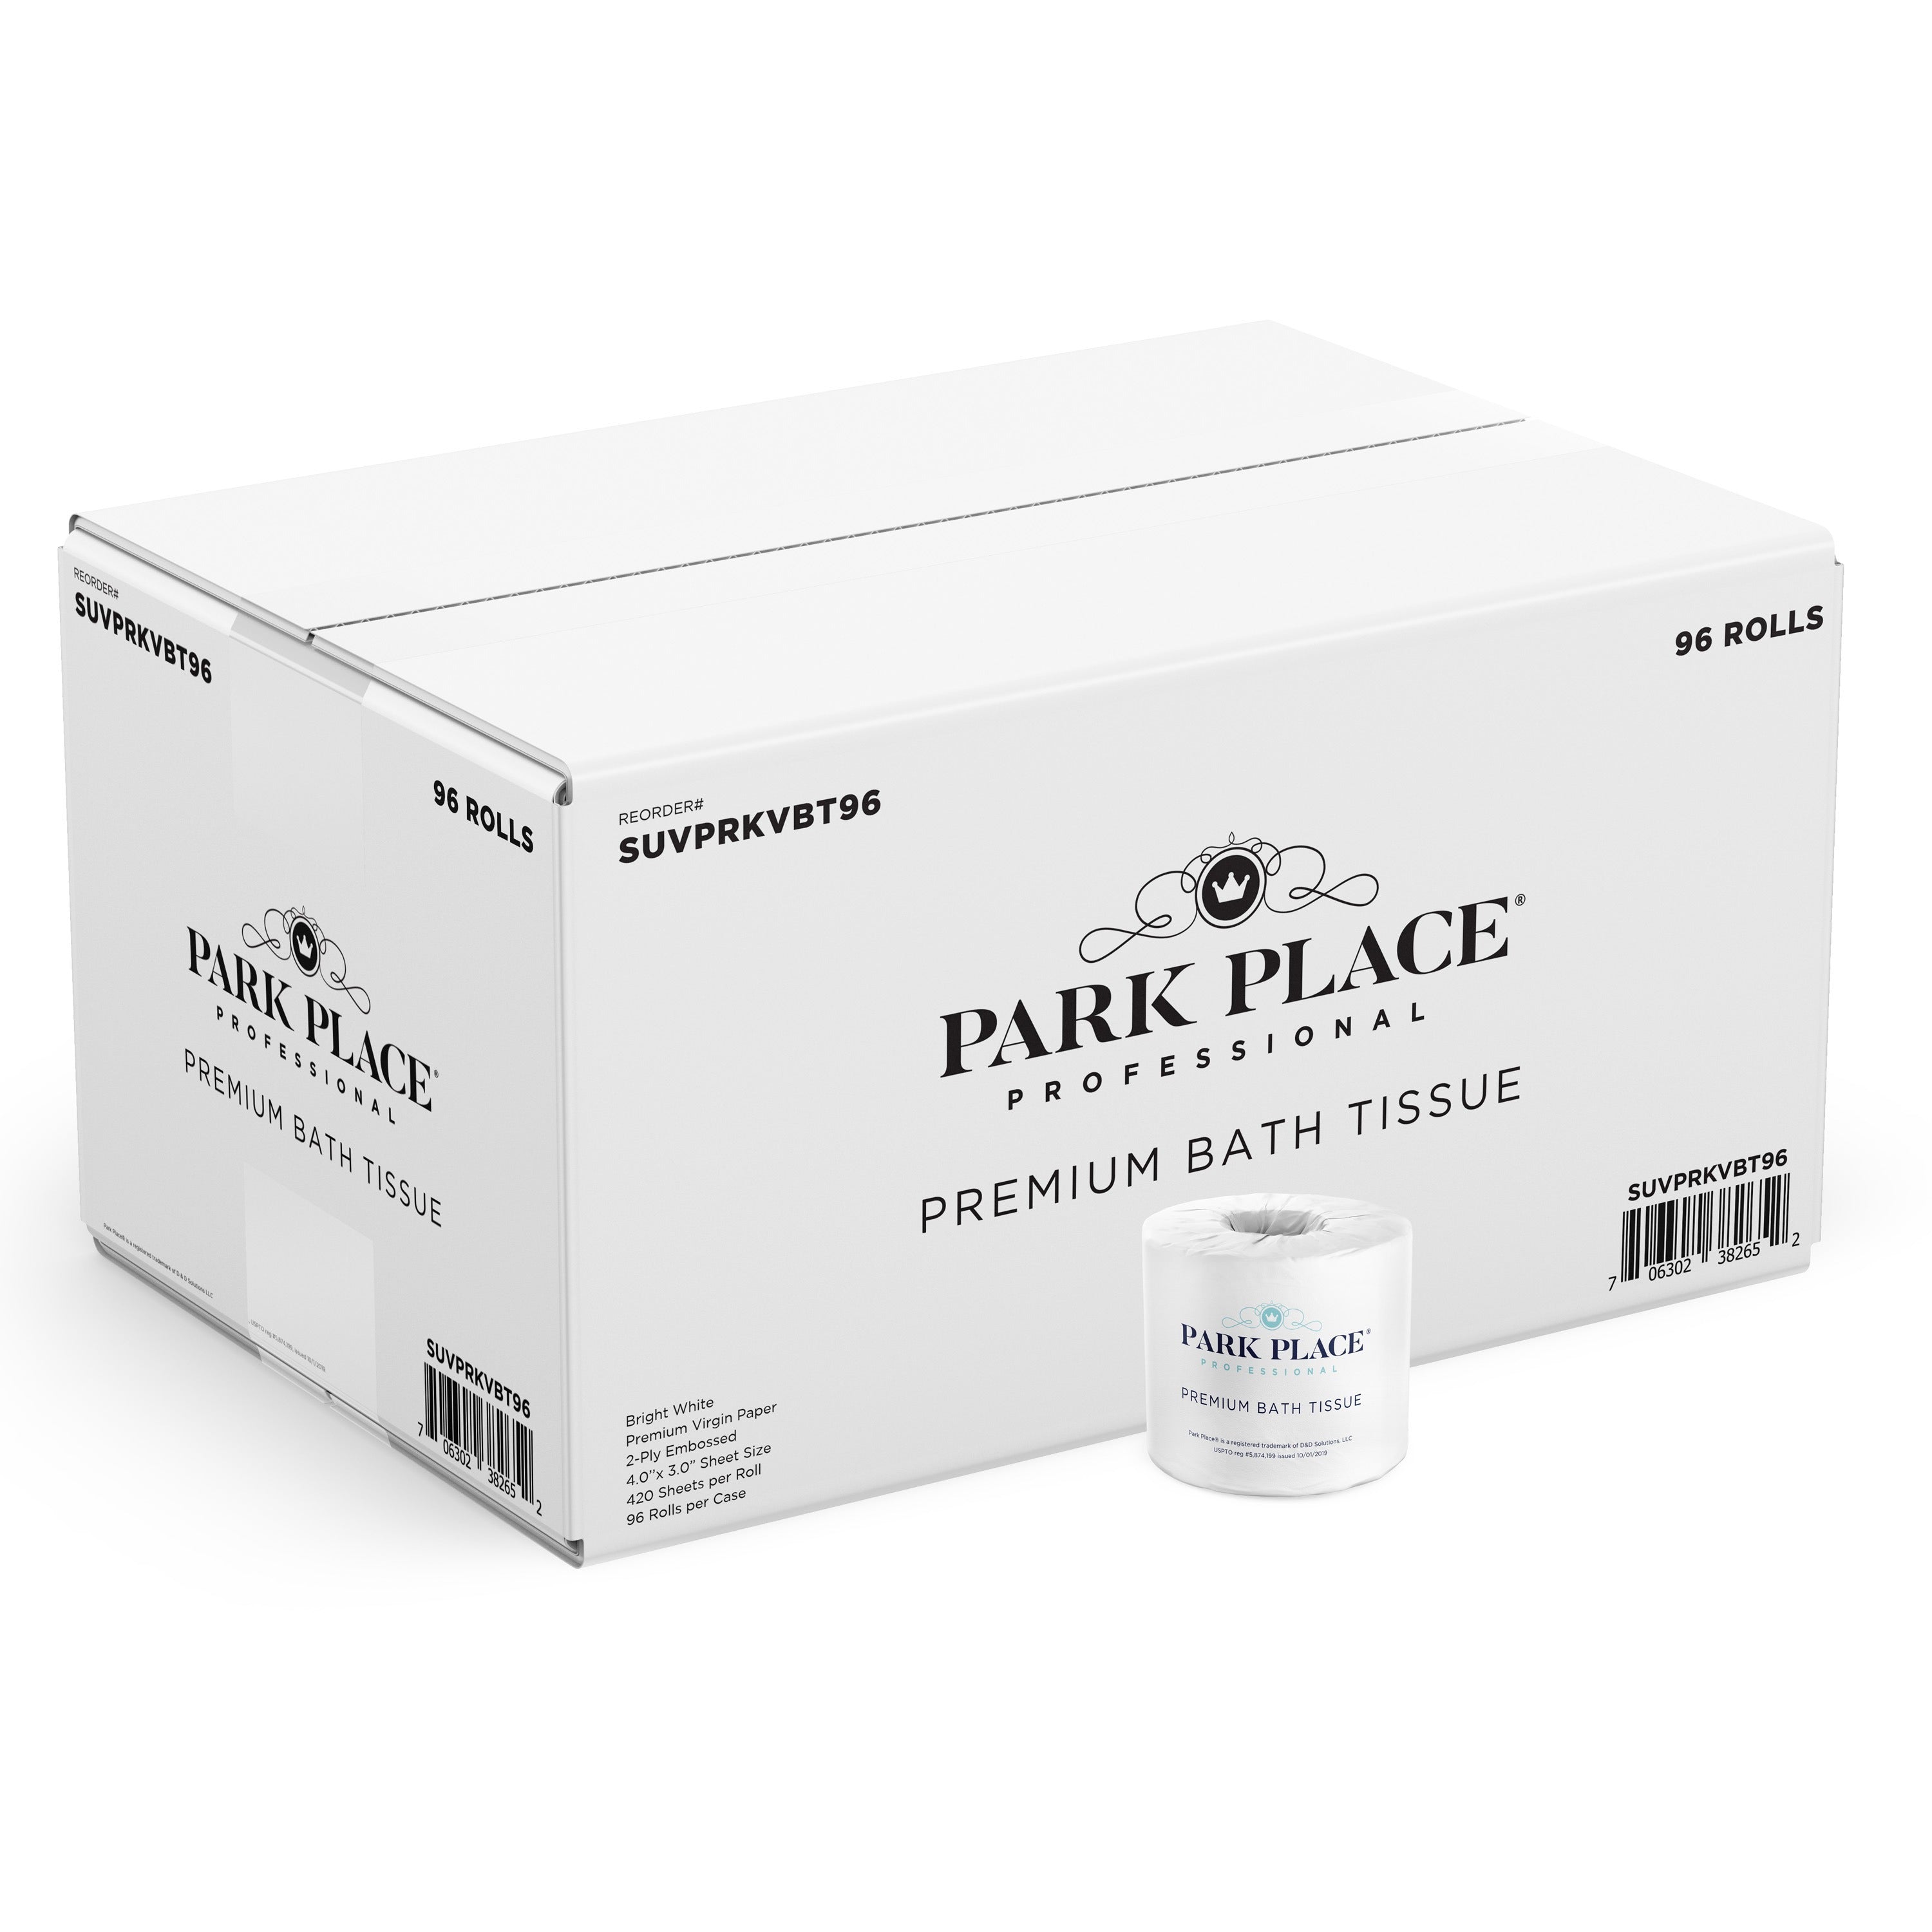 park-place-double-ply-premium-bath-tissue-rolls-2-ply-420-sheets-roll-white-for-bathroom-96-carton_suvprkvbt96 - 4